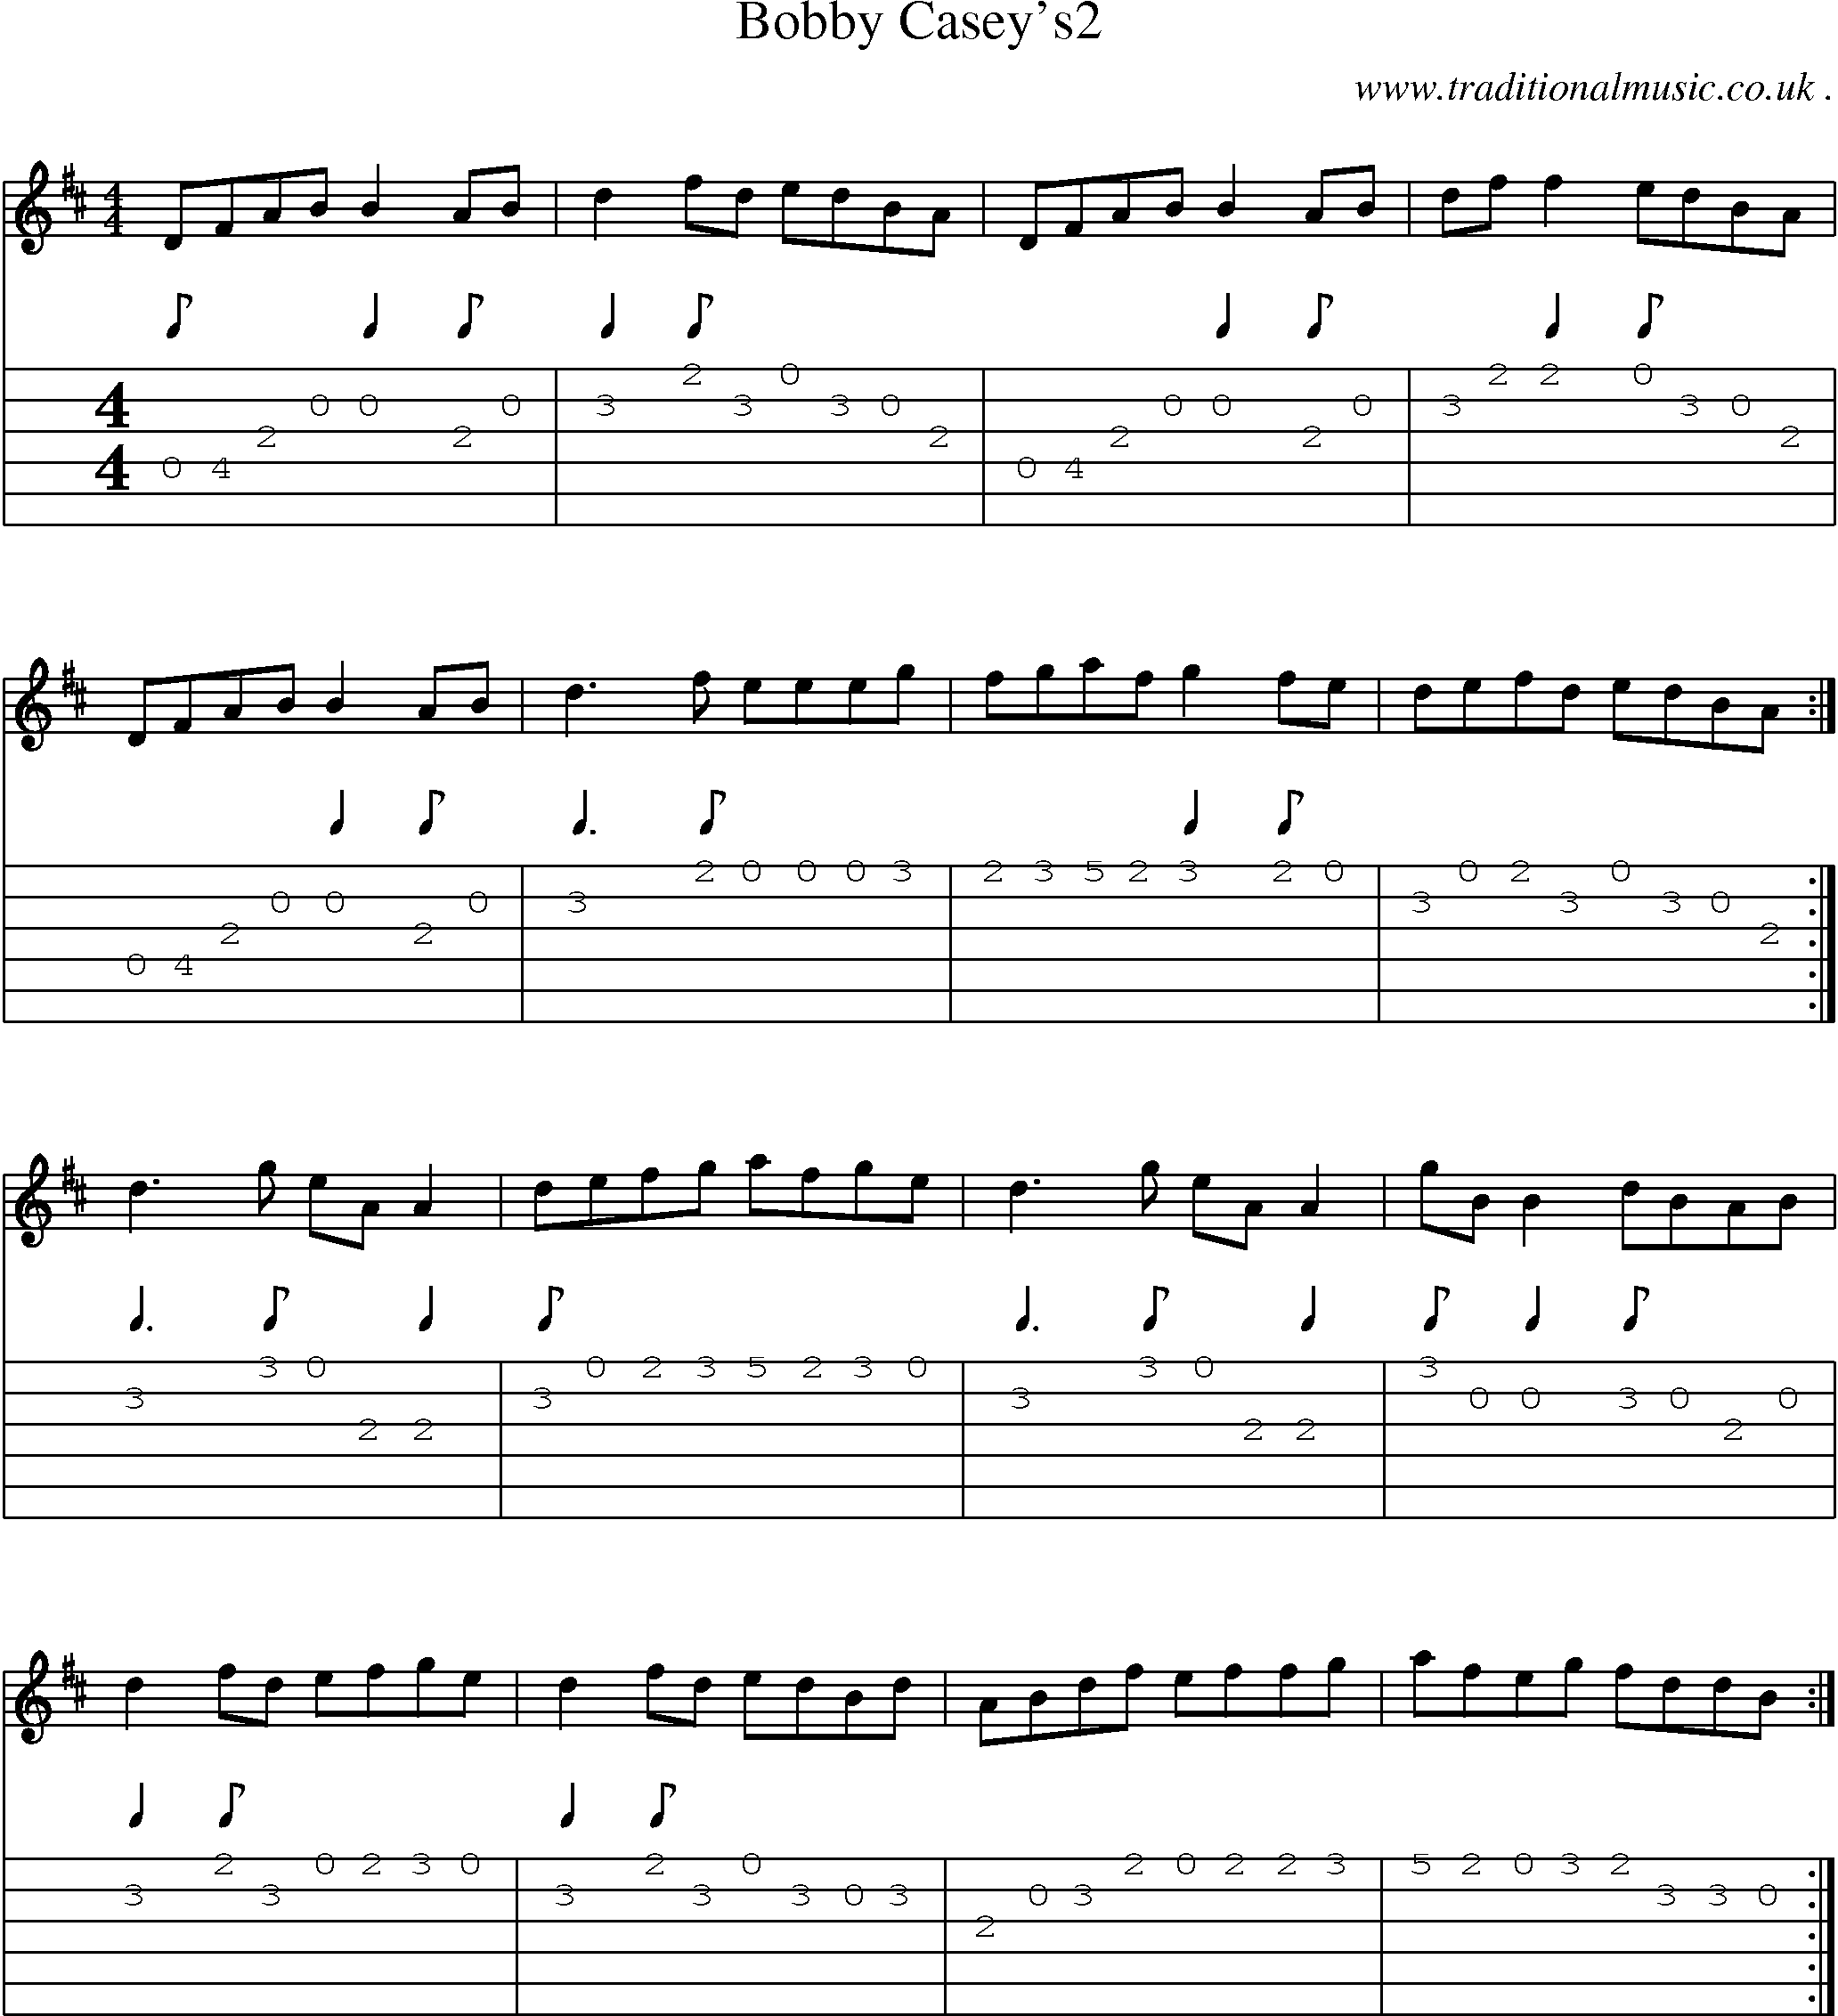 Sheet-Music and Guitar Tabs for Bobby Caseys2